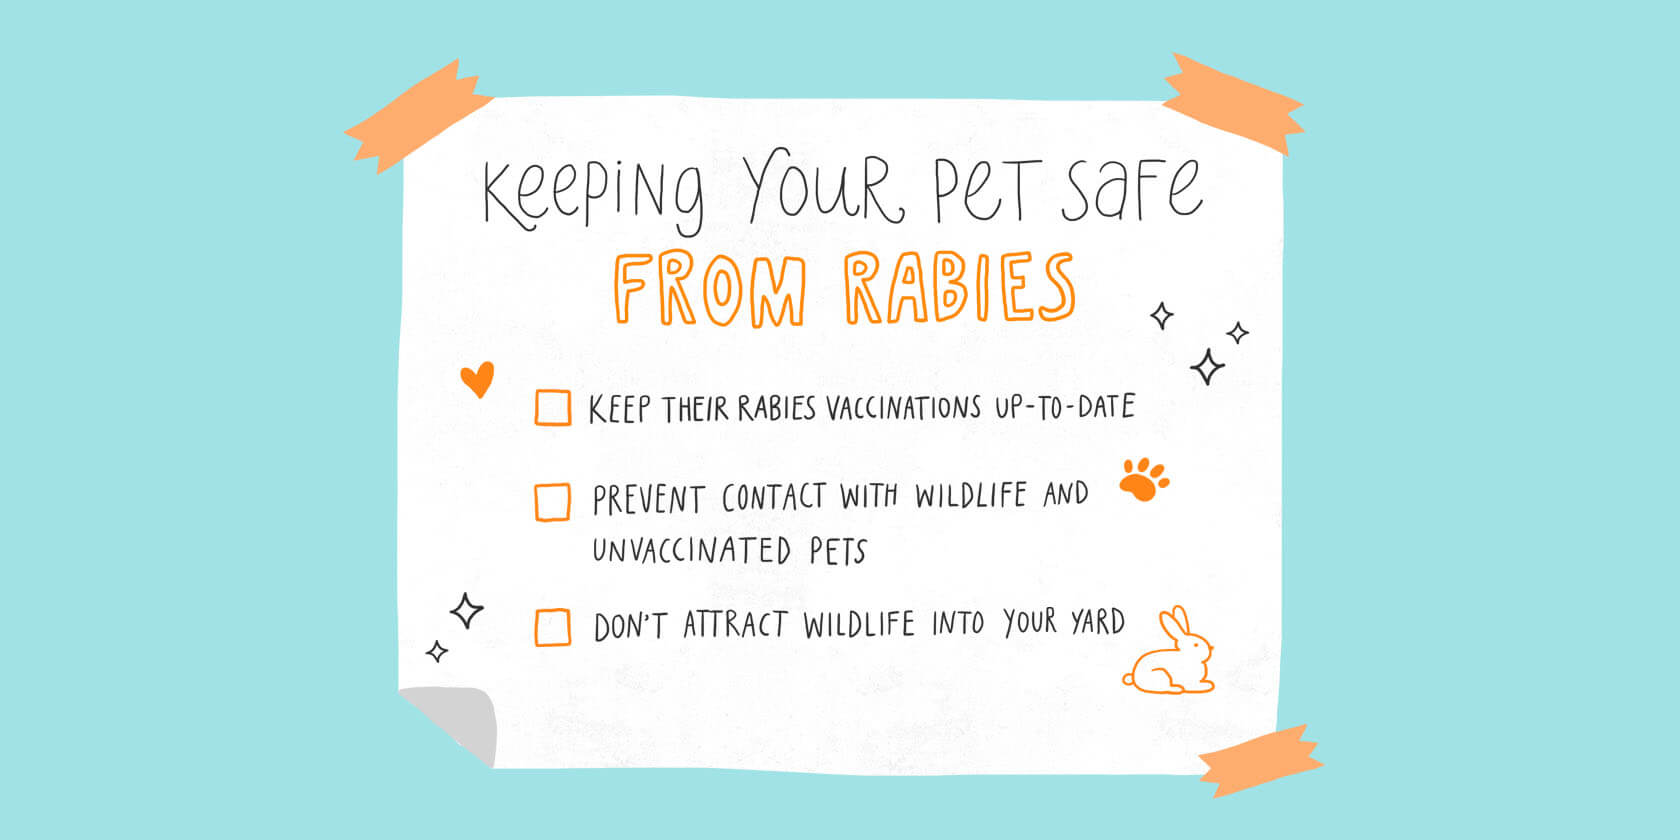 Keeping your pet safe from rabies.